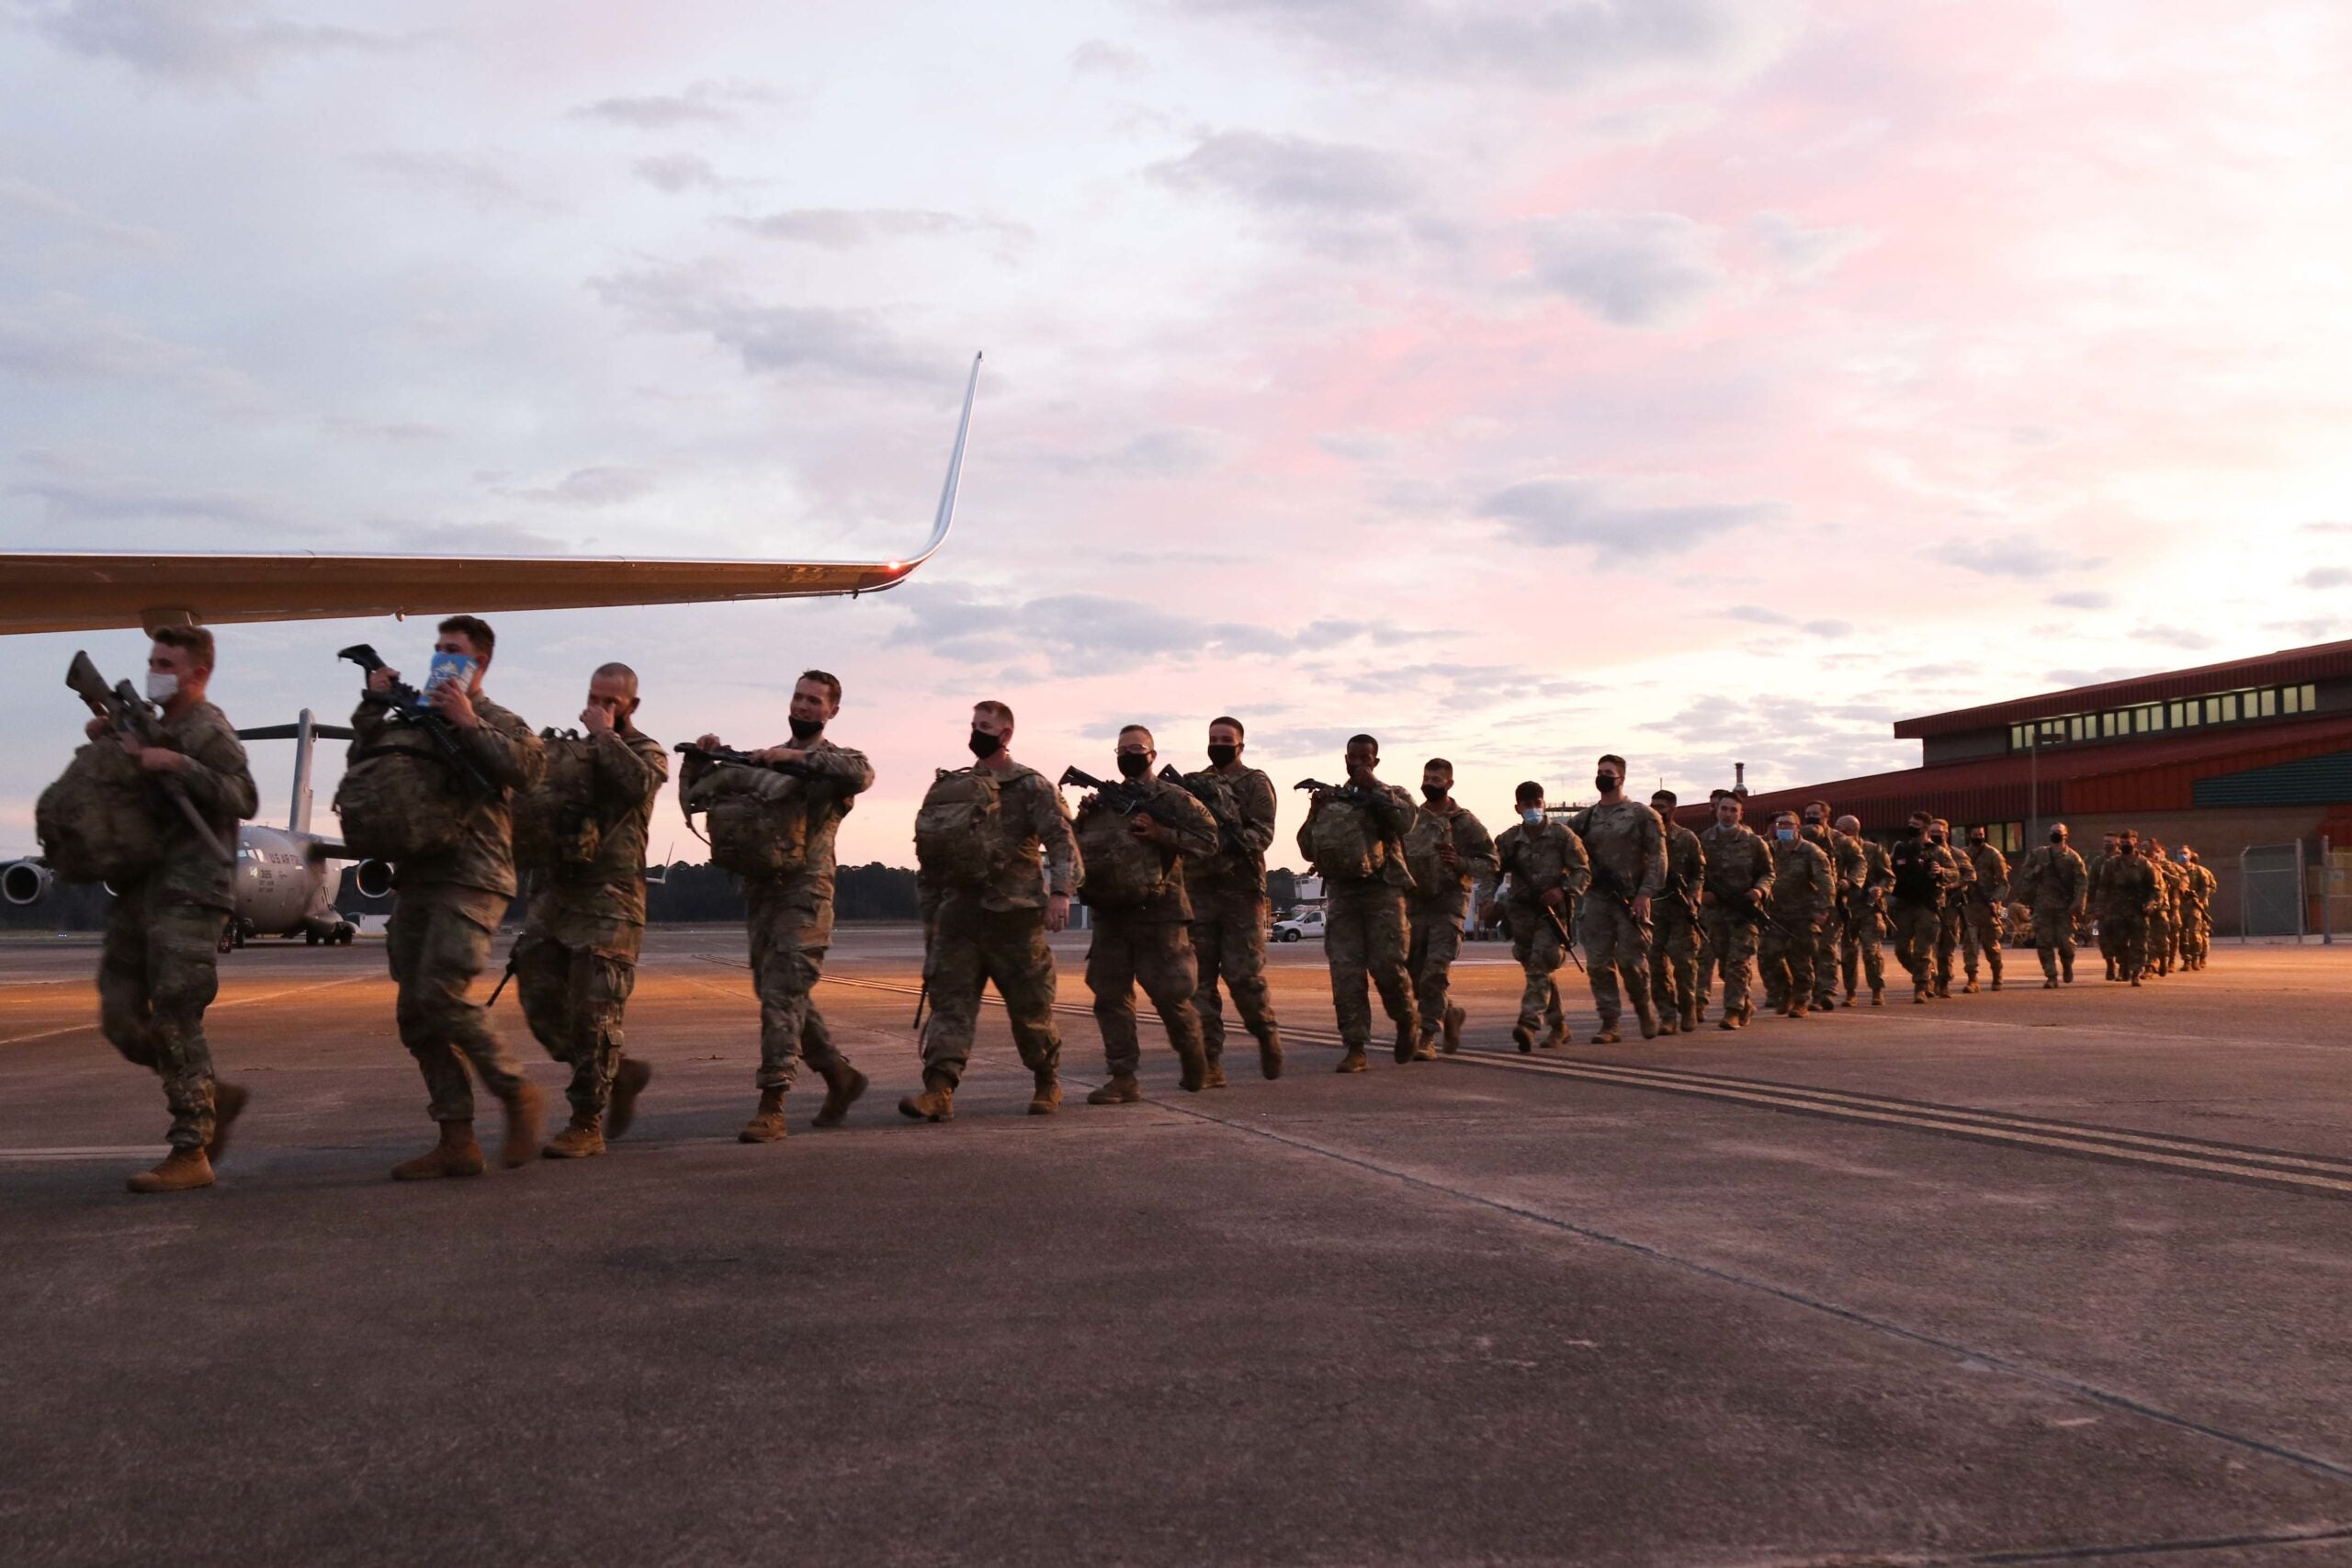 U.S. Army service members assigned to the 1st Armored Brigade Combat Team, 3rd Infantry Division, deploy to the U.S. Army Europe and Africa area of operations, from Hunter Army Airfield, Georgia, Feb. 28, 2022. The 1st ABCT, 3rd ID is the major unit of the 7,000 service members ordered to deploy by U.S. Secretary of Defense Lloyd J. Austin III to enhance deterrence of Russia. (U.S. Army photo by Sgt. 1st Class Jason Hull)